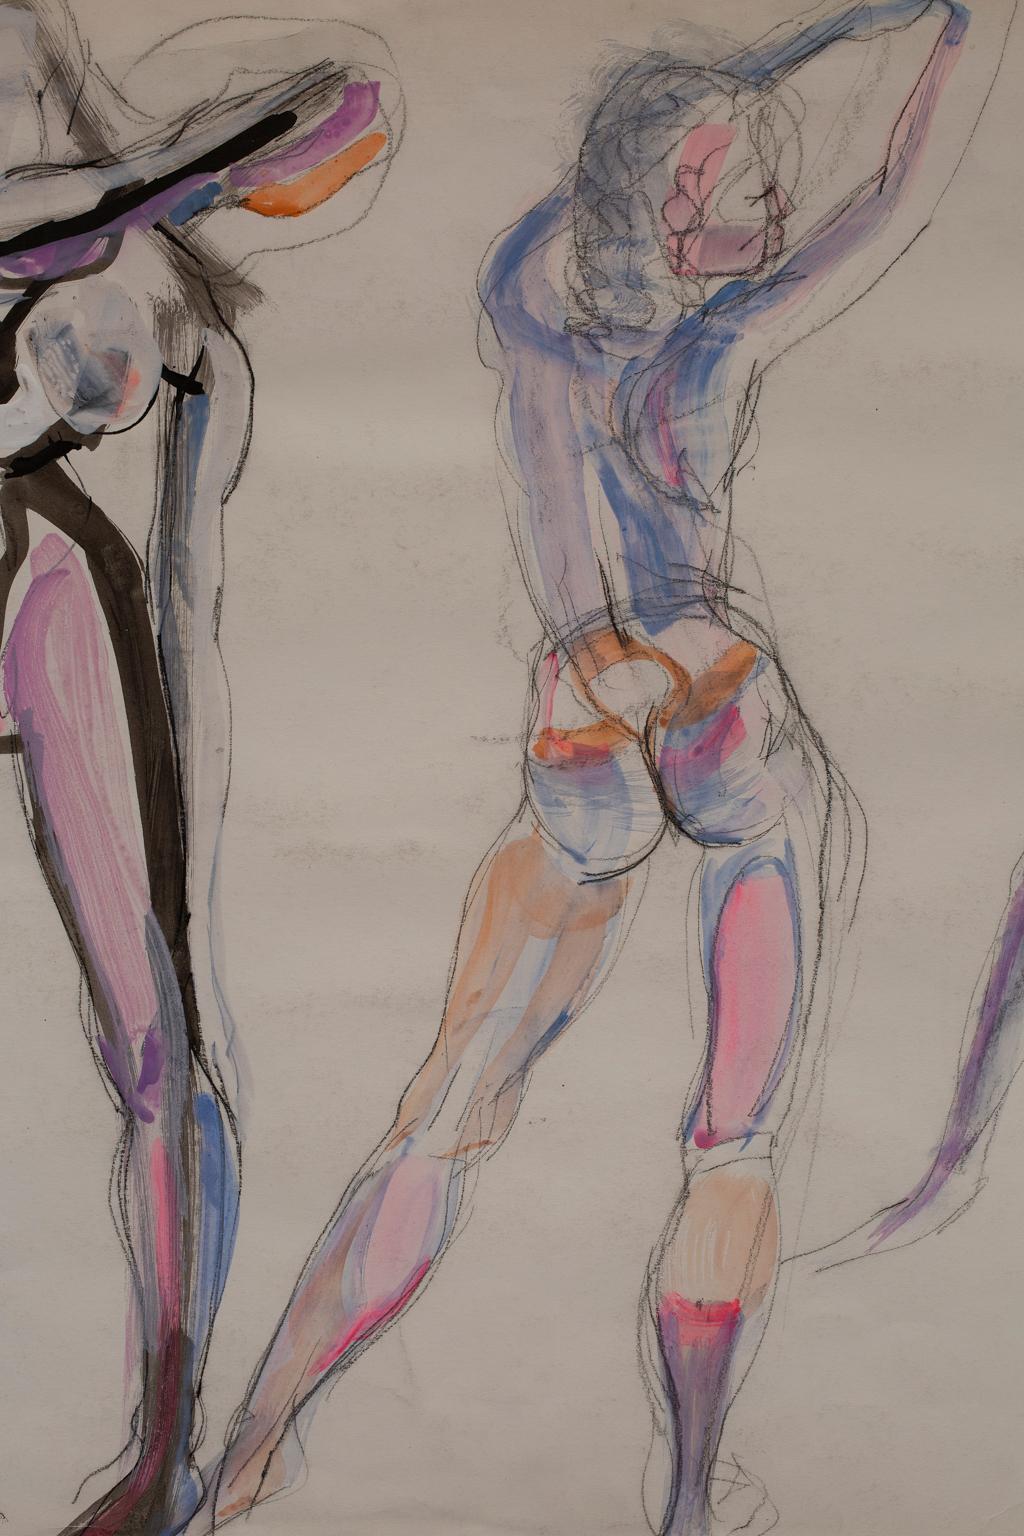 This mixed media on paper from the seminal artist Artis Lane is one of the many model paintings from her long and illustrious career. The subject are three dancers in pose. Artis Lane, in her many nudes, chose to depict a diversity of bodies, of all